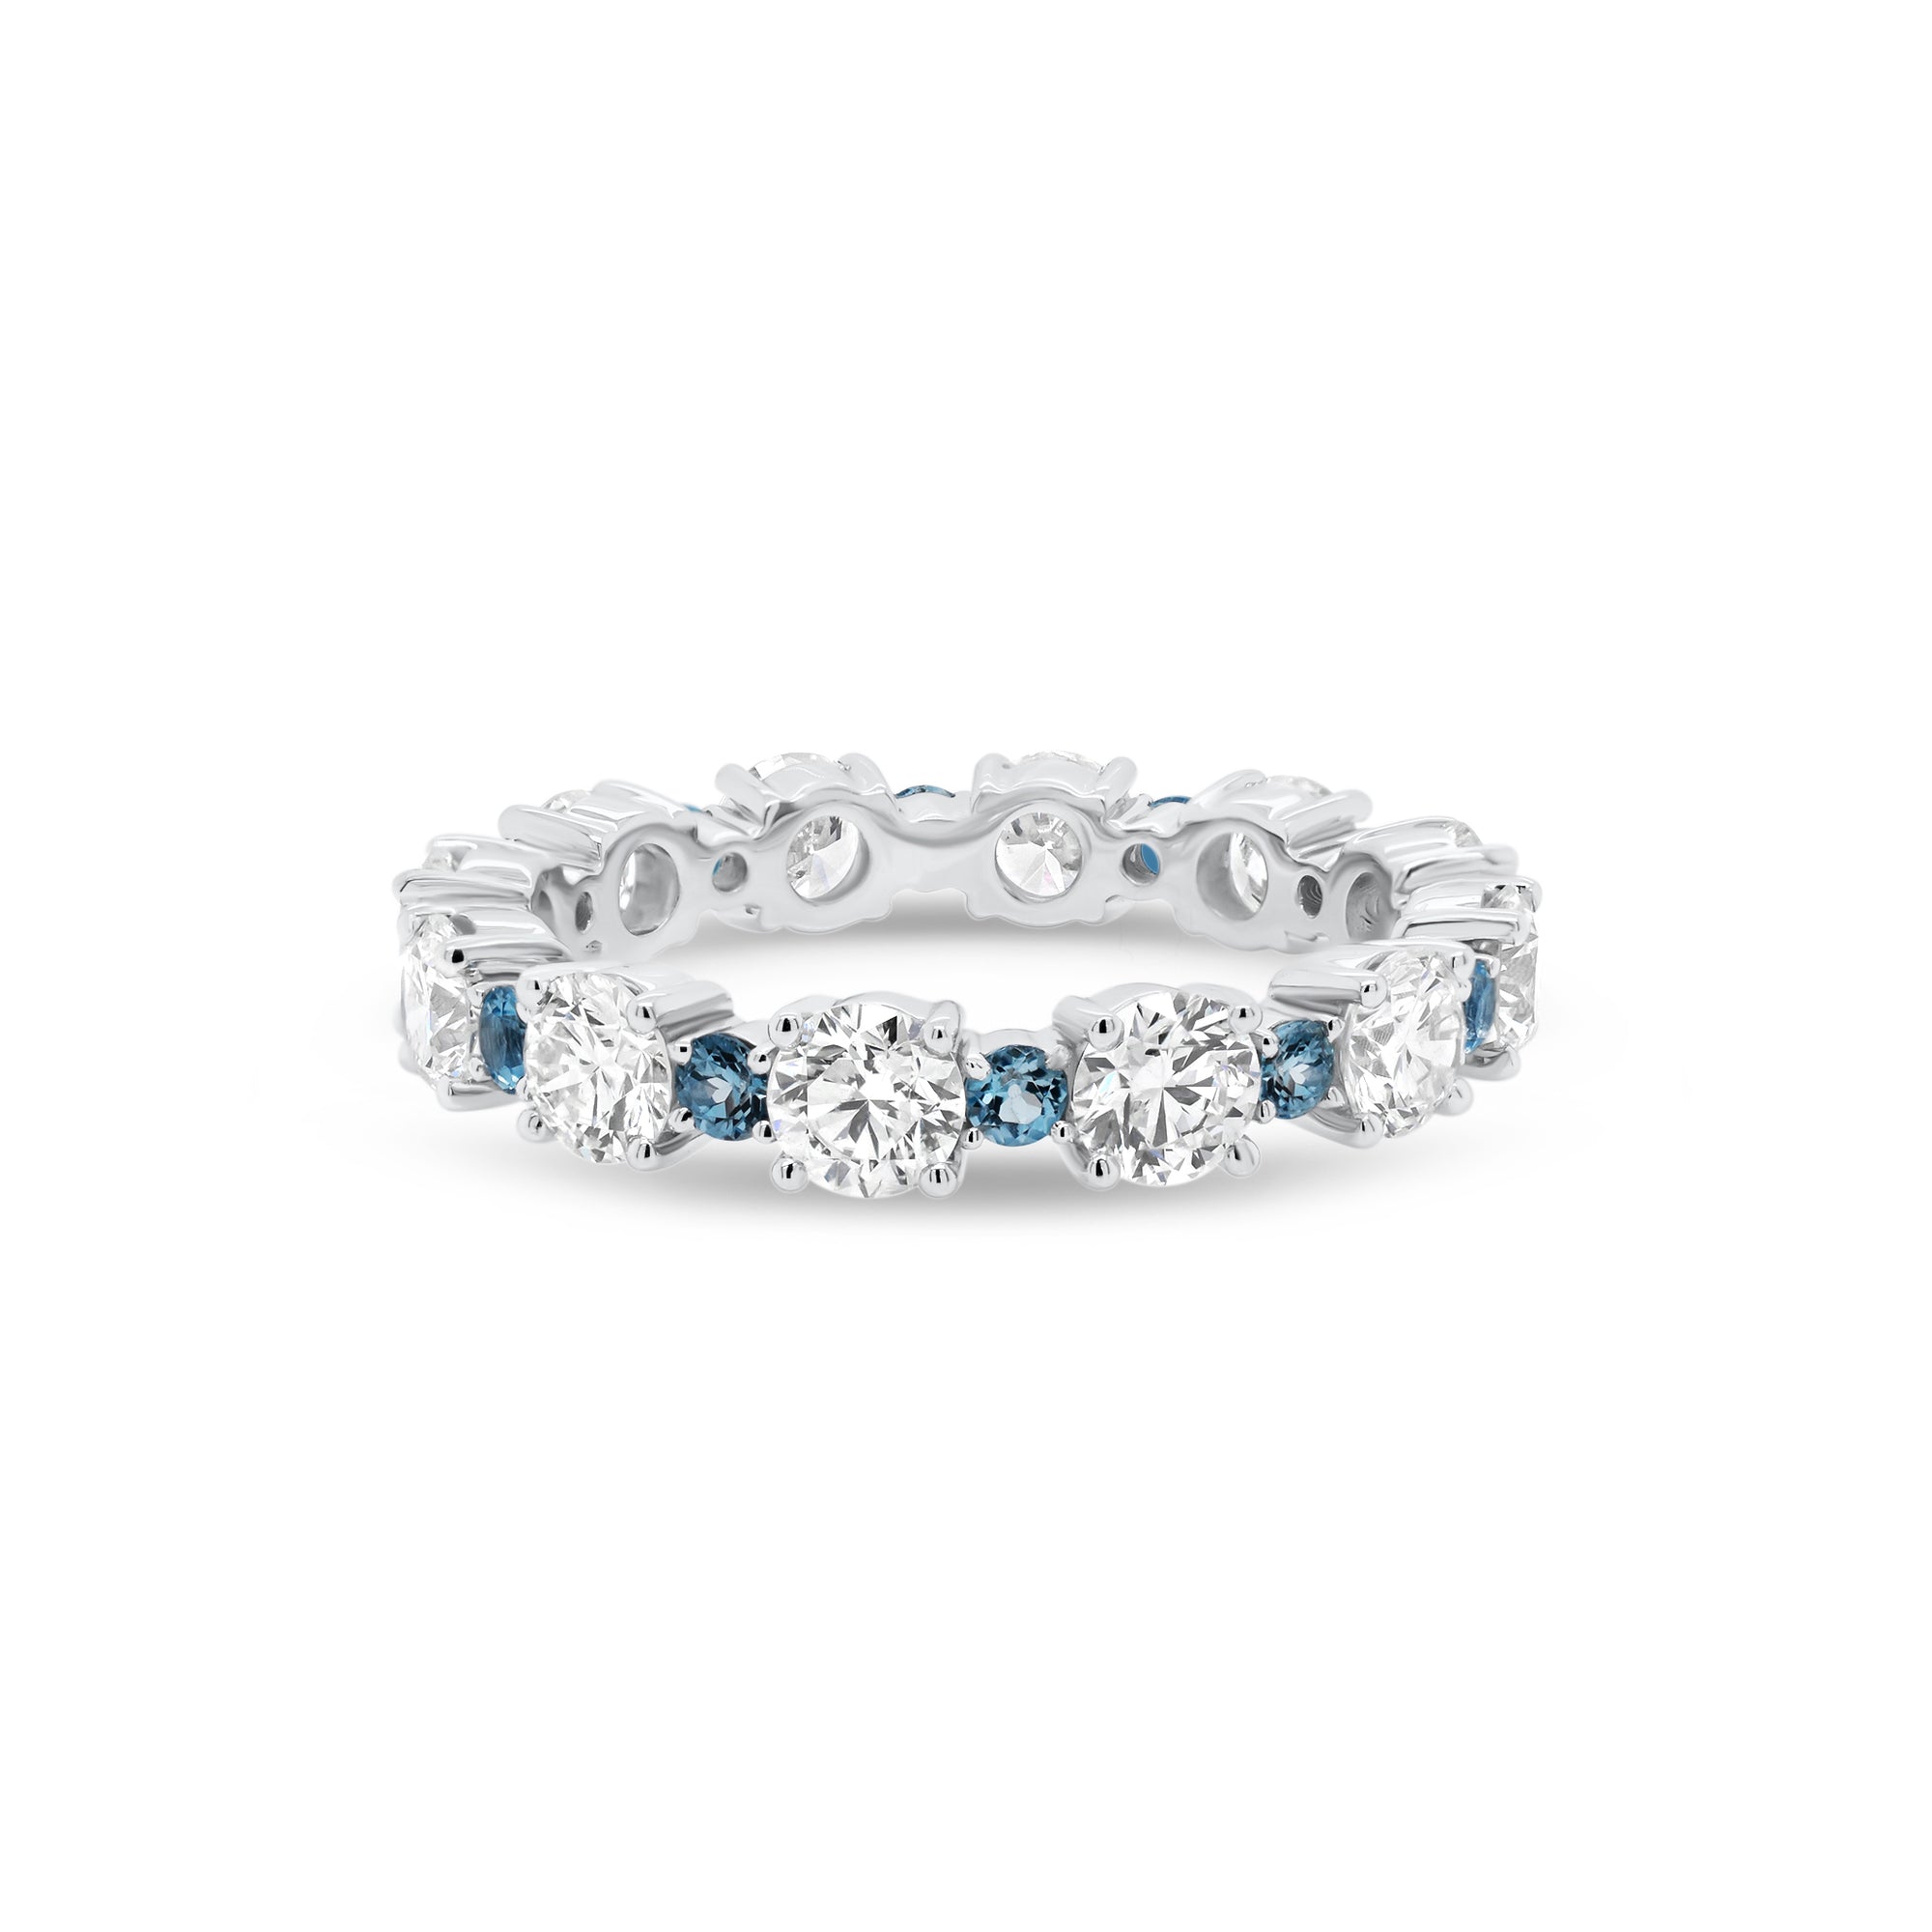 Classic Eternity Ring with Blue Aquamarine  - 18K gold weighing 3.07 grams  - 12 round diamonds totaling 2.13 carats  - 12 blue round aquamarine totaling 0.43 carats